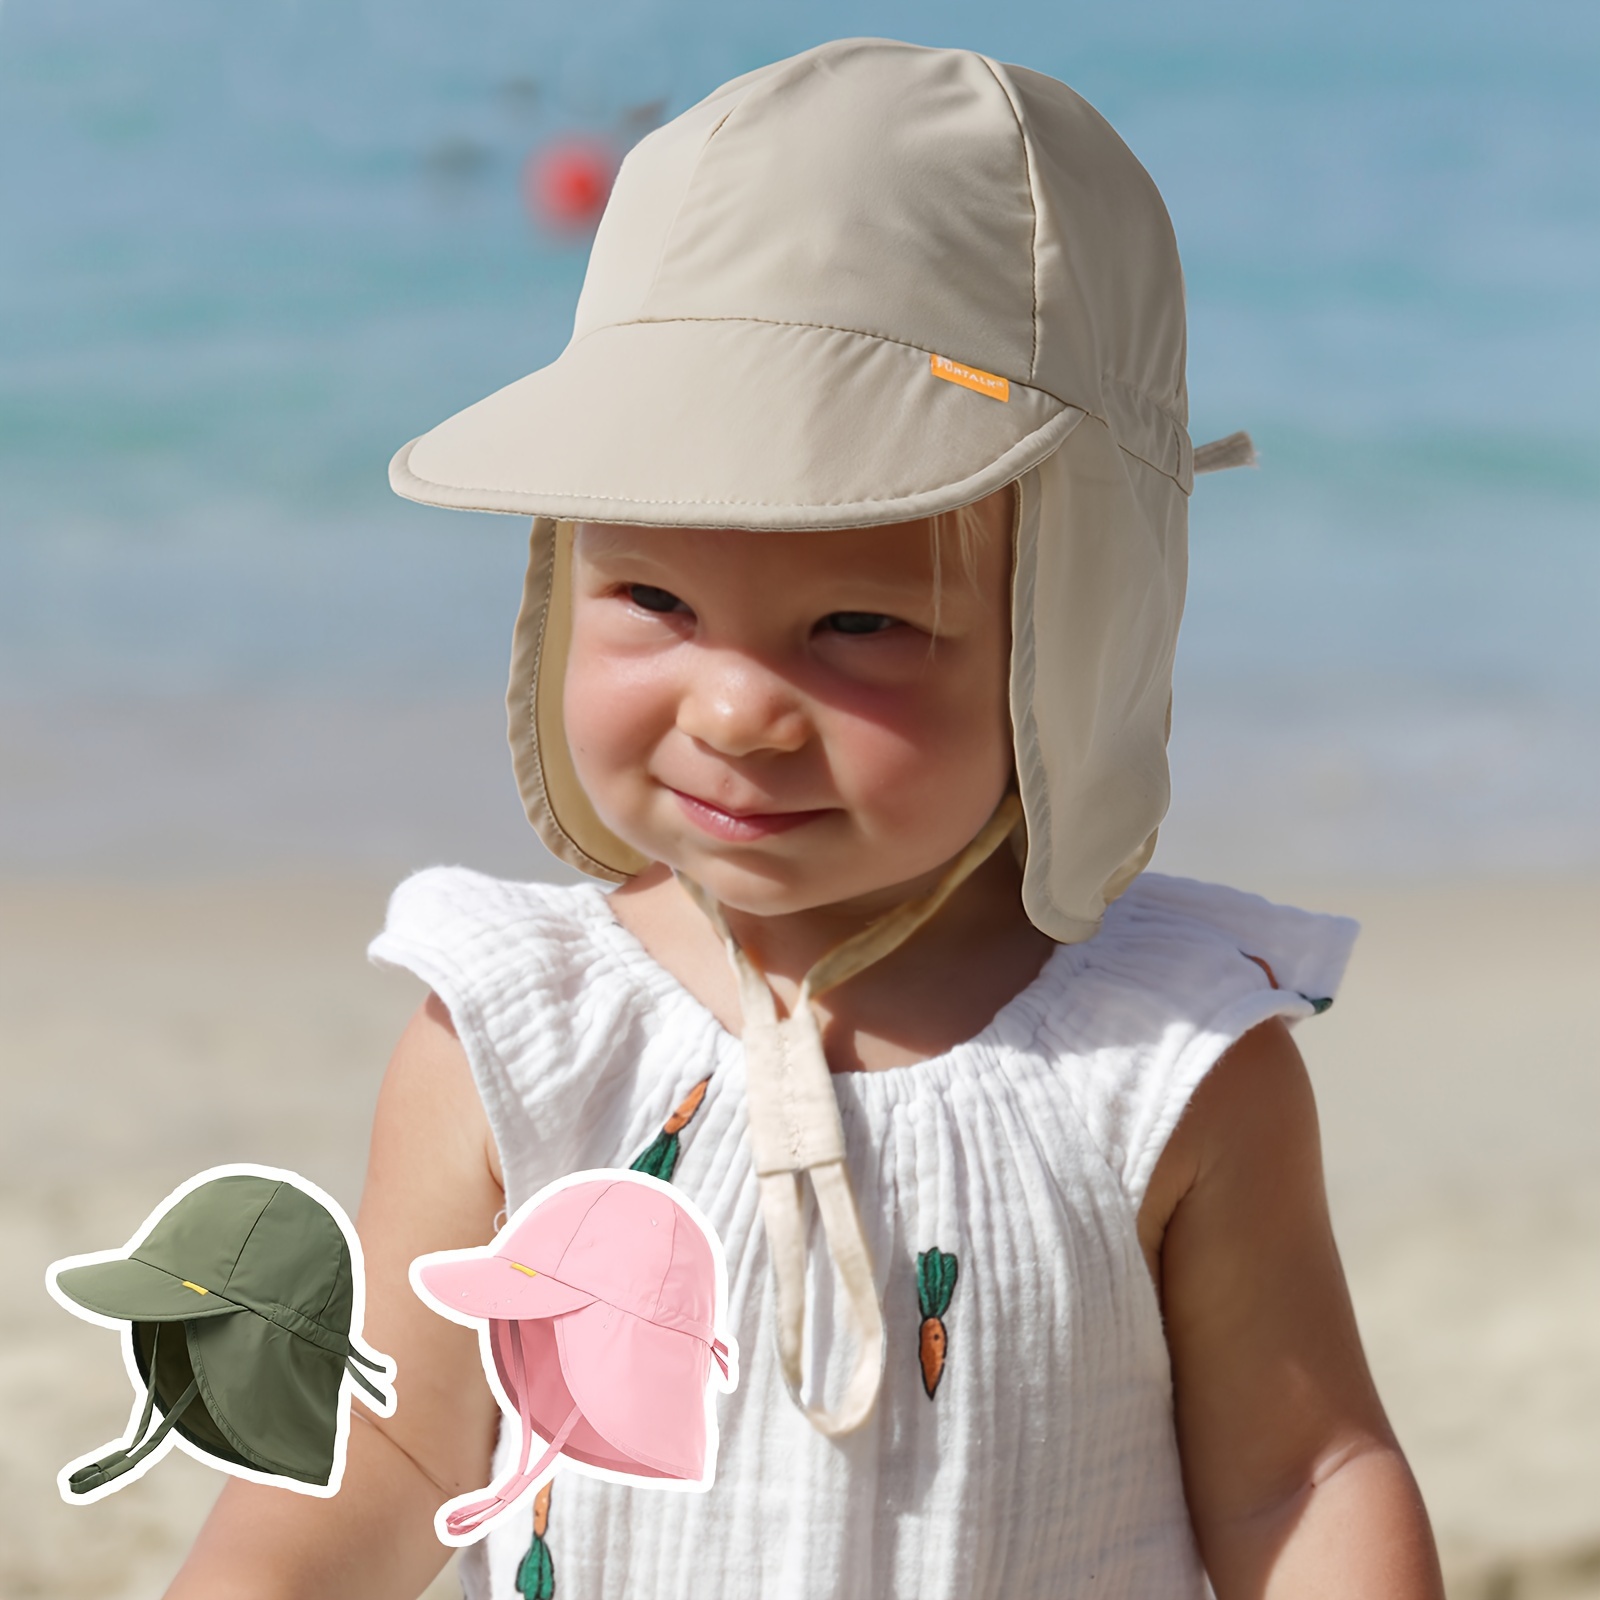 

1pc Baby Sun Quick Drying Summer Adjustable Hat With Neck Flap, For Traveling Swimming